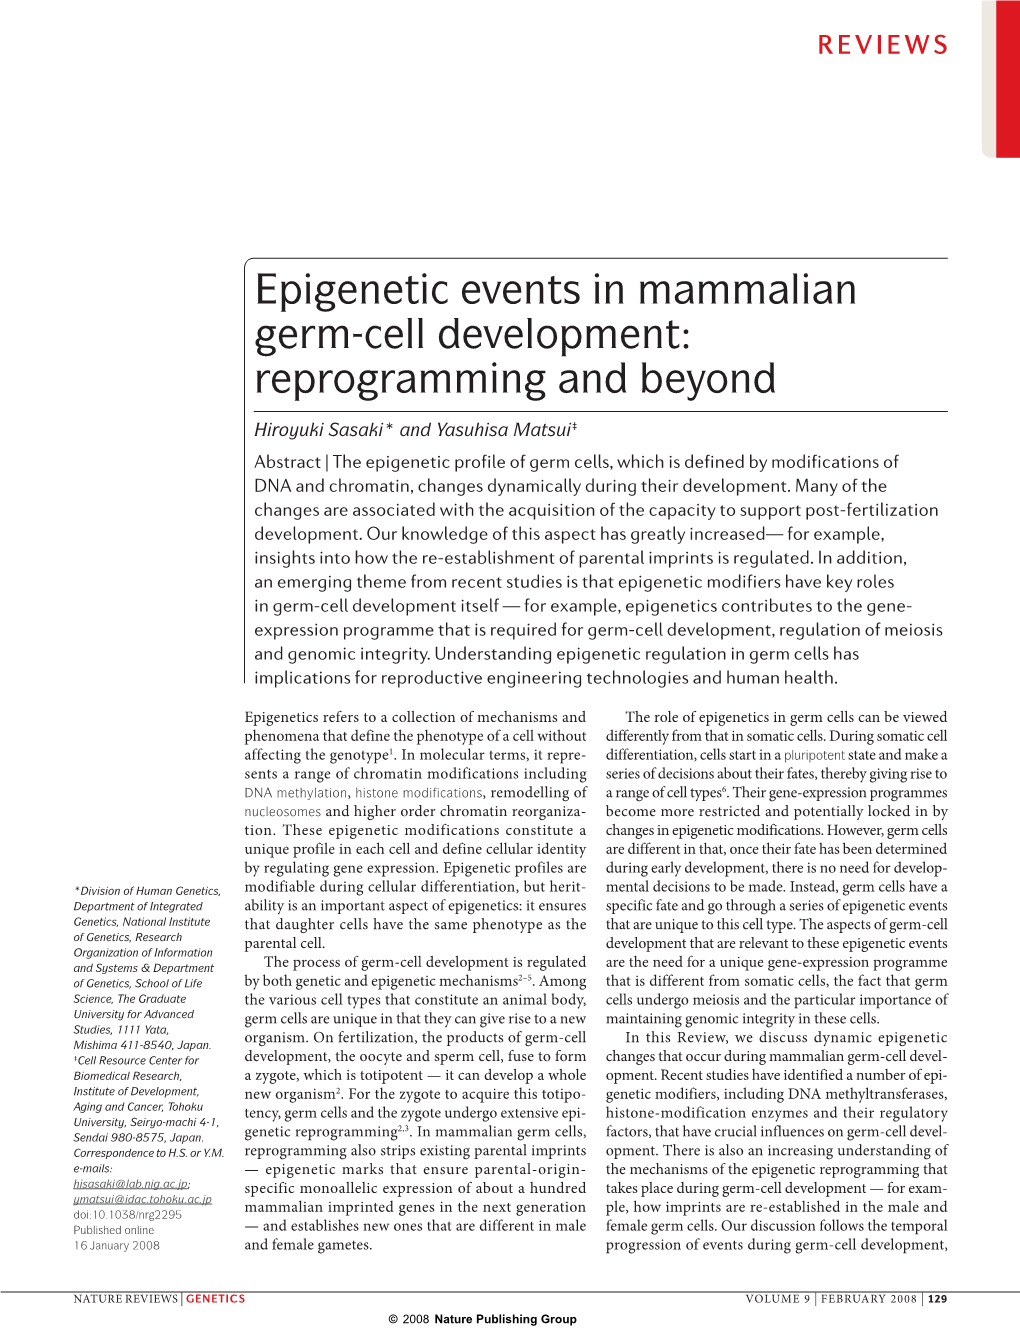 Epigenetic Events in Mammalian Germ-Cell Development: Reprogramming and Beyond